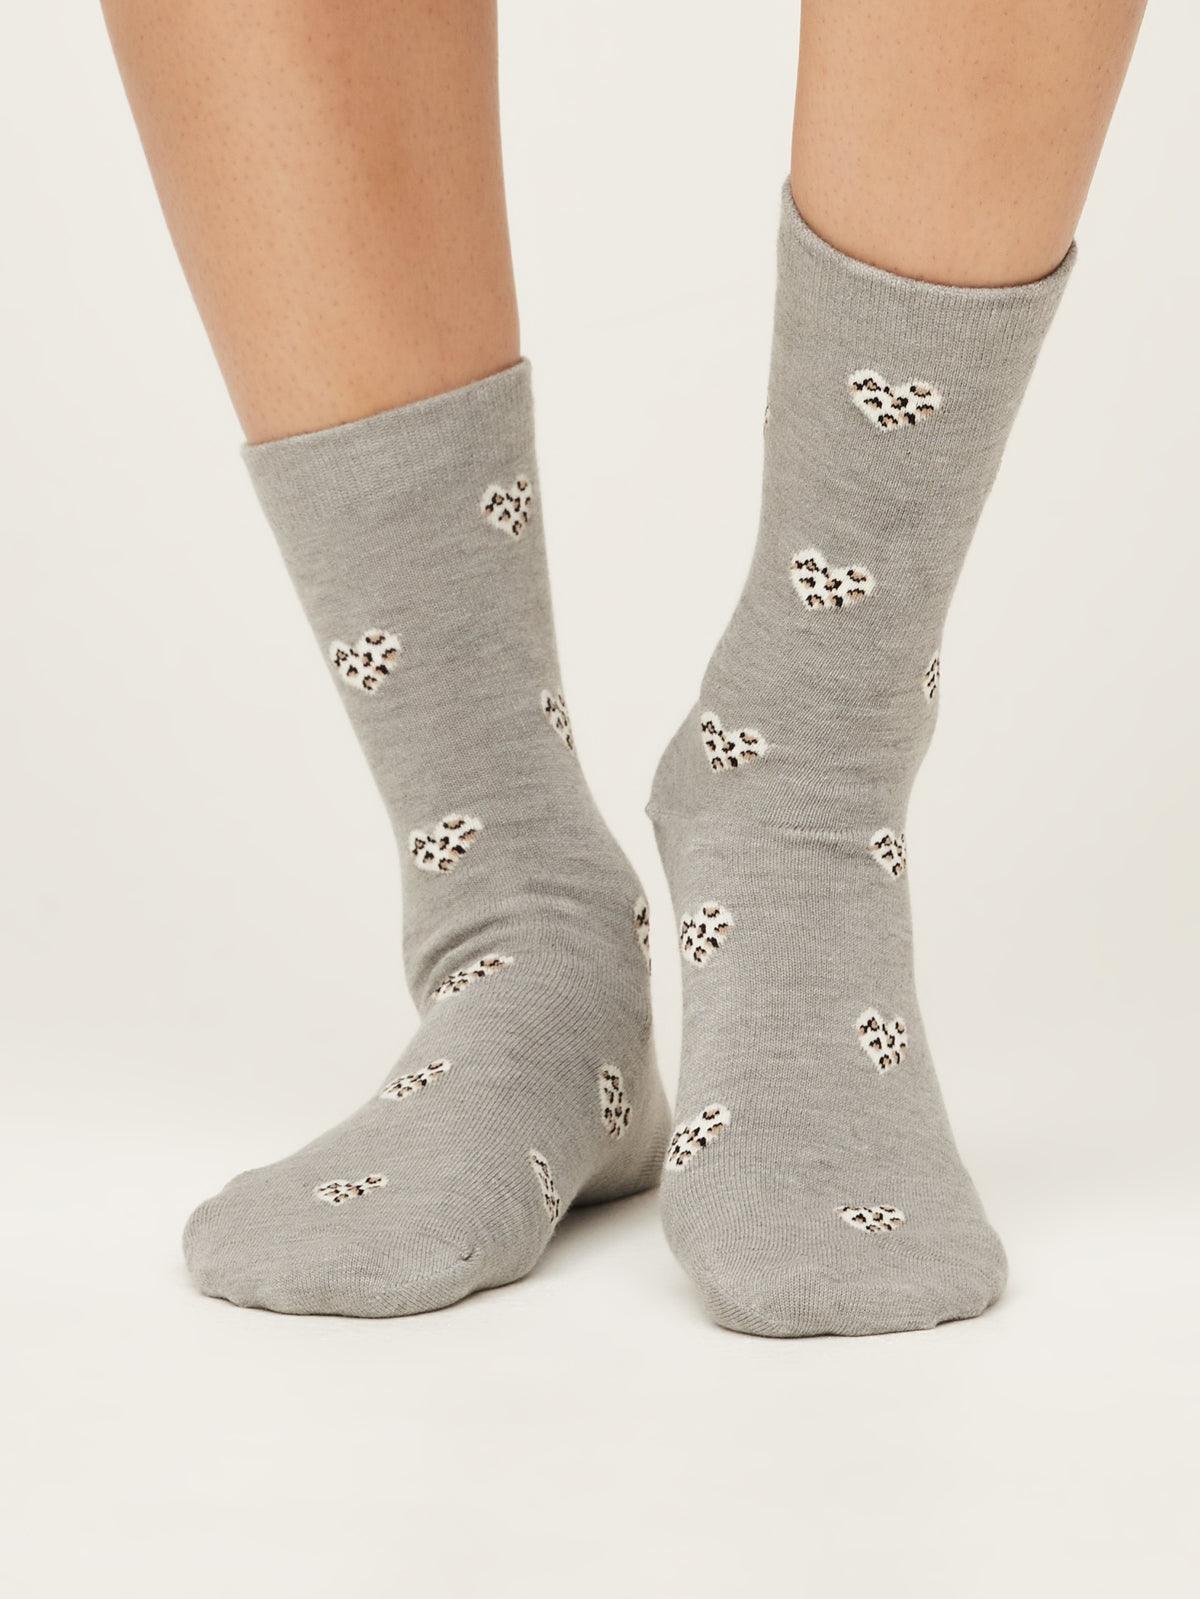 Leopard Heart Socks - Mid Grey Marle - Thought Clothing UK